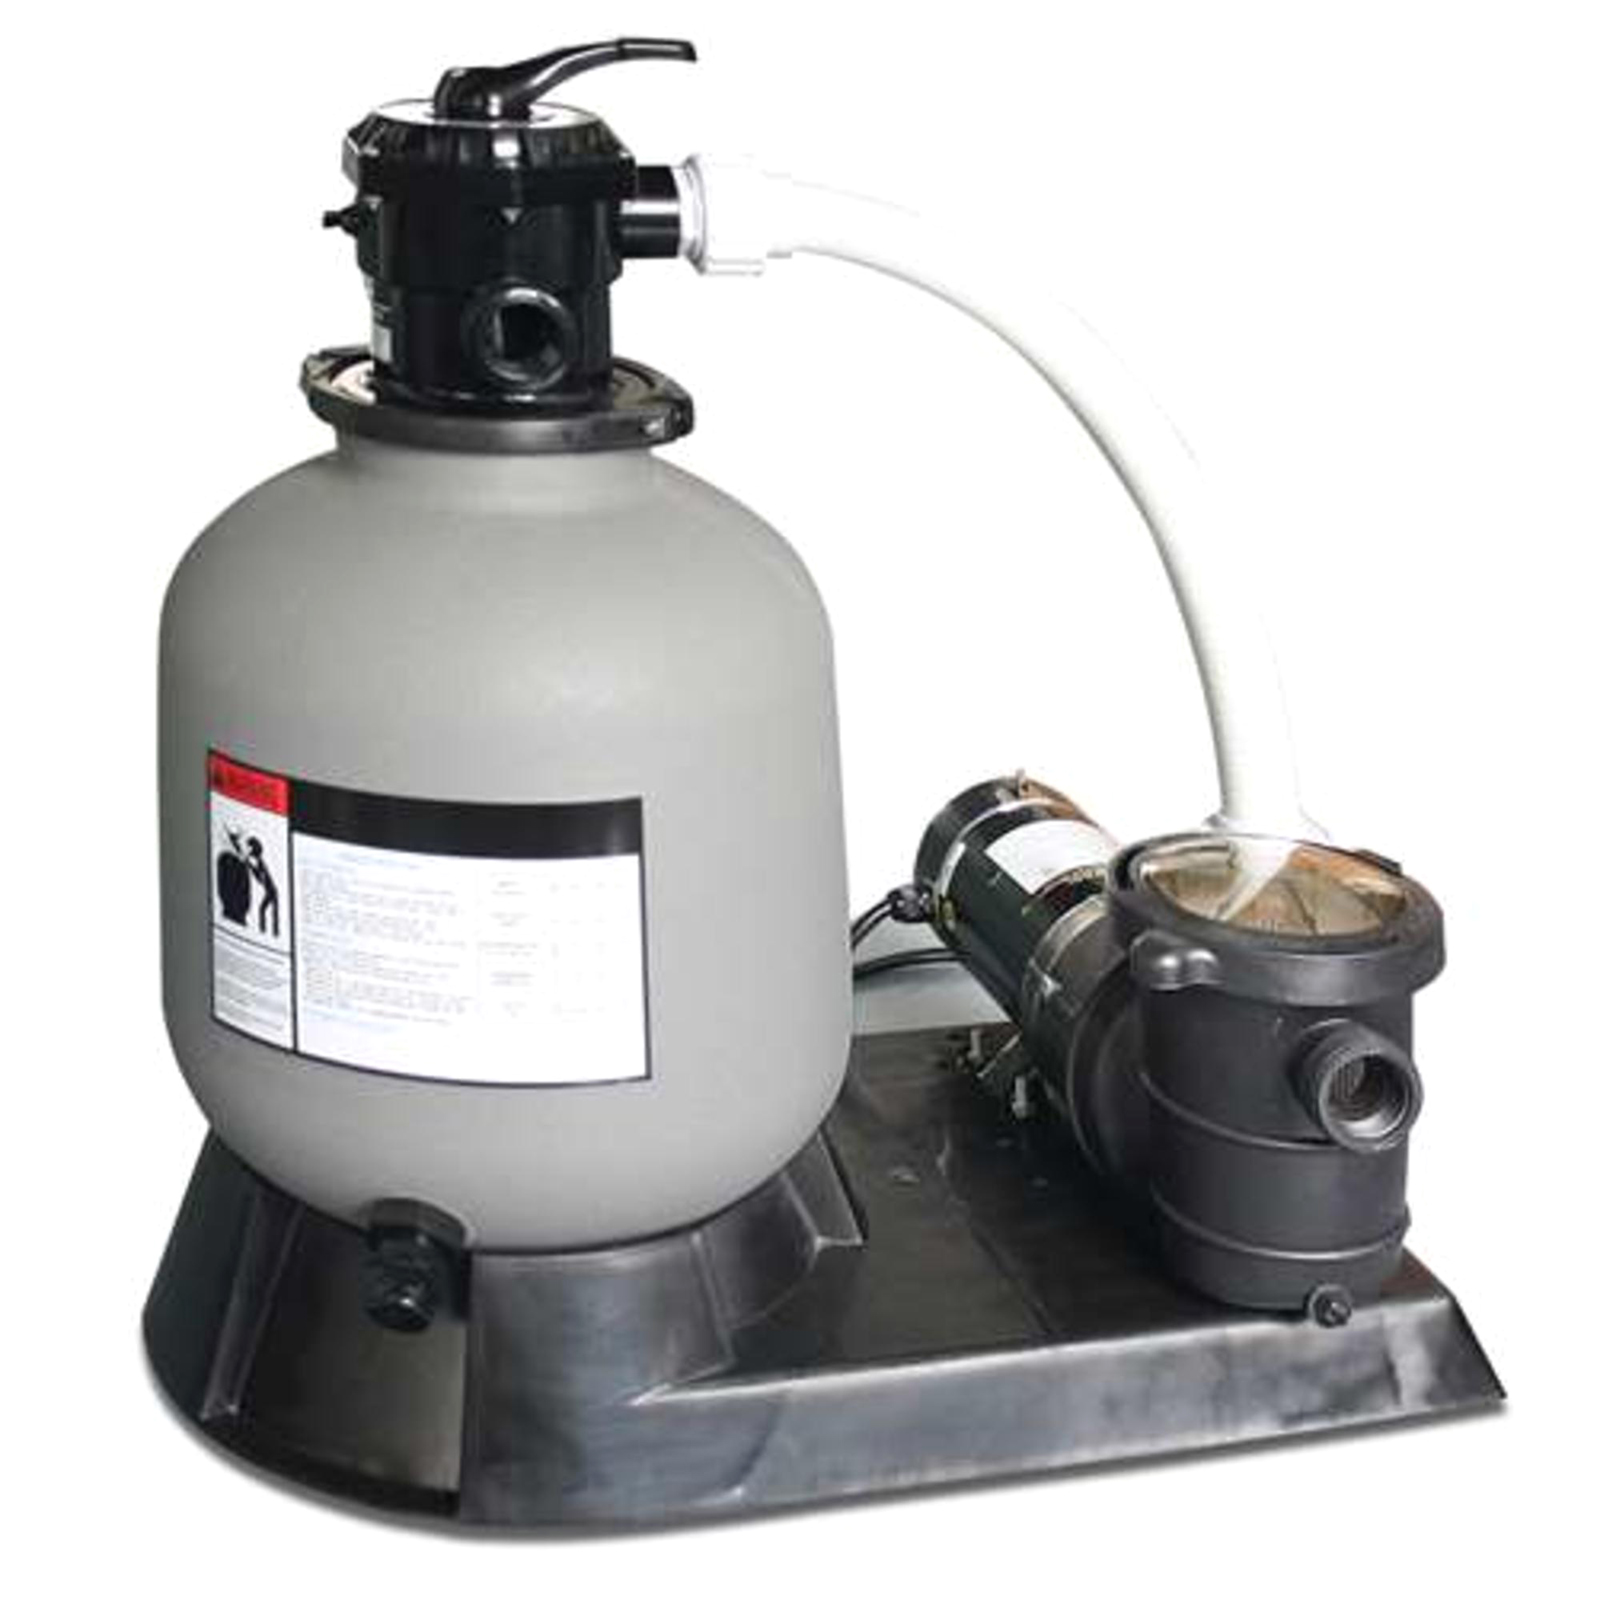 Swimline 71915 19" Sand Filter Combo for Above Ground Pool